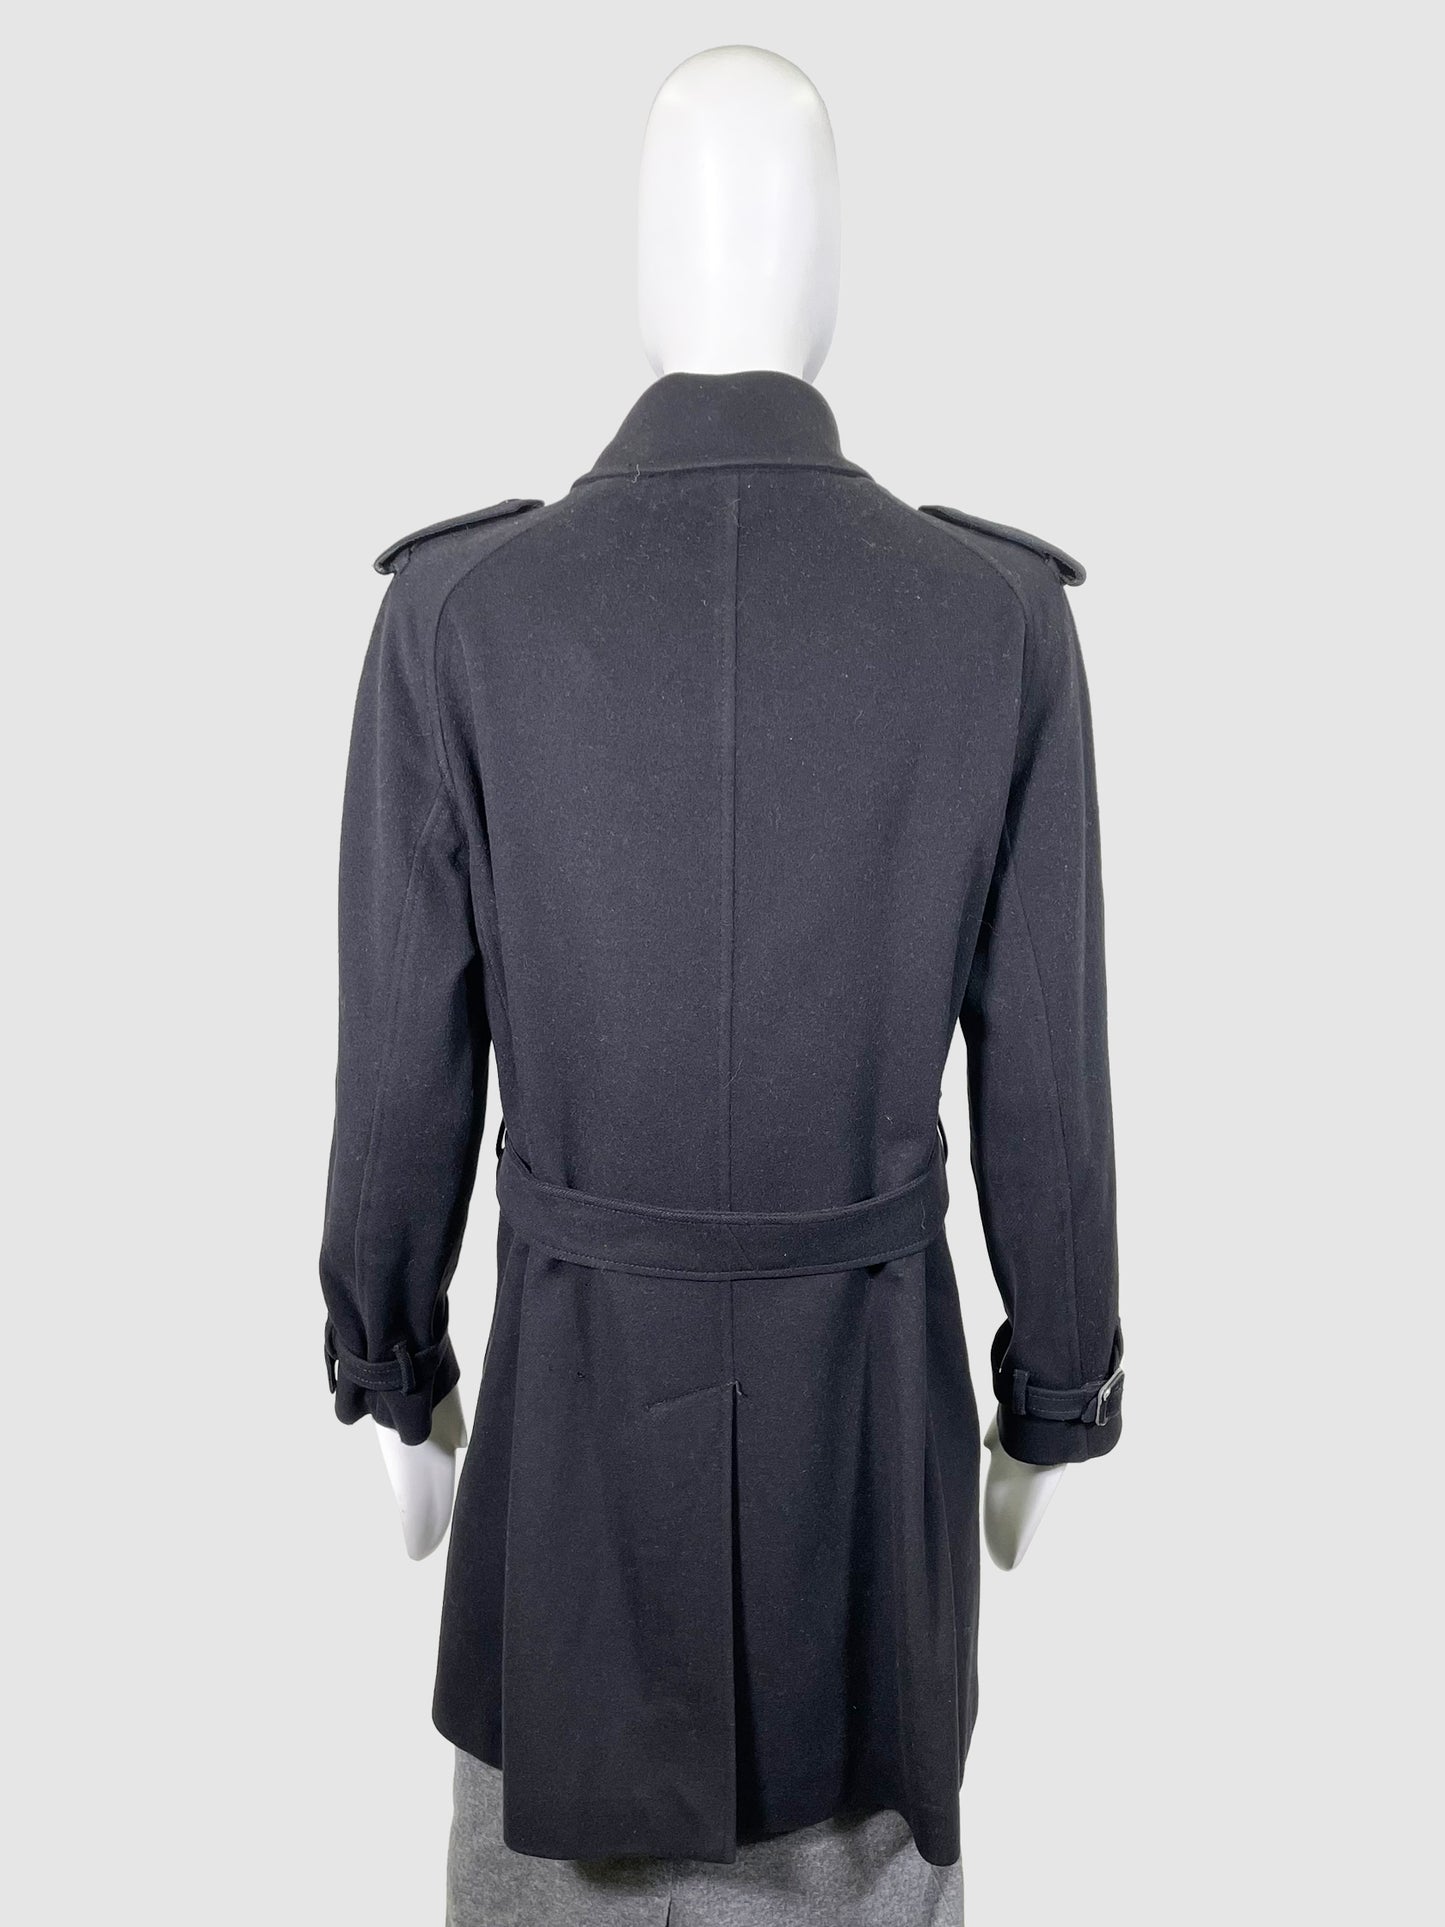 Burberry Wool and Cashmere Coat - Size 10